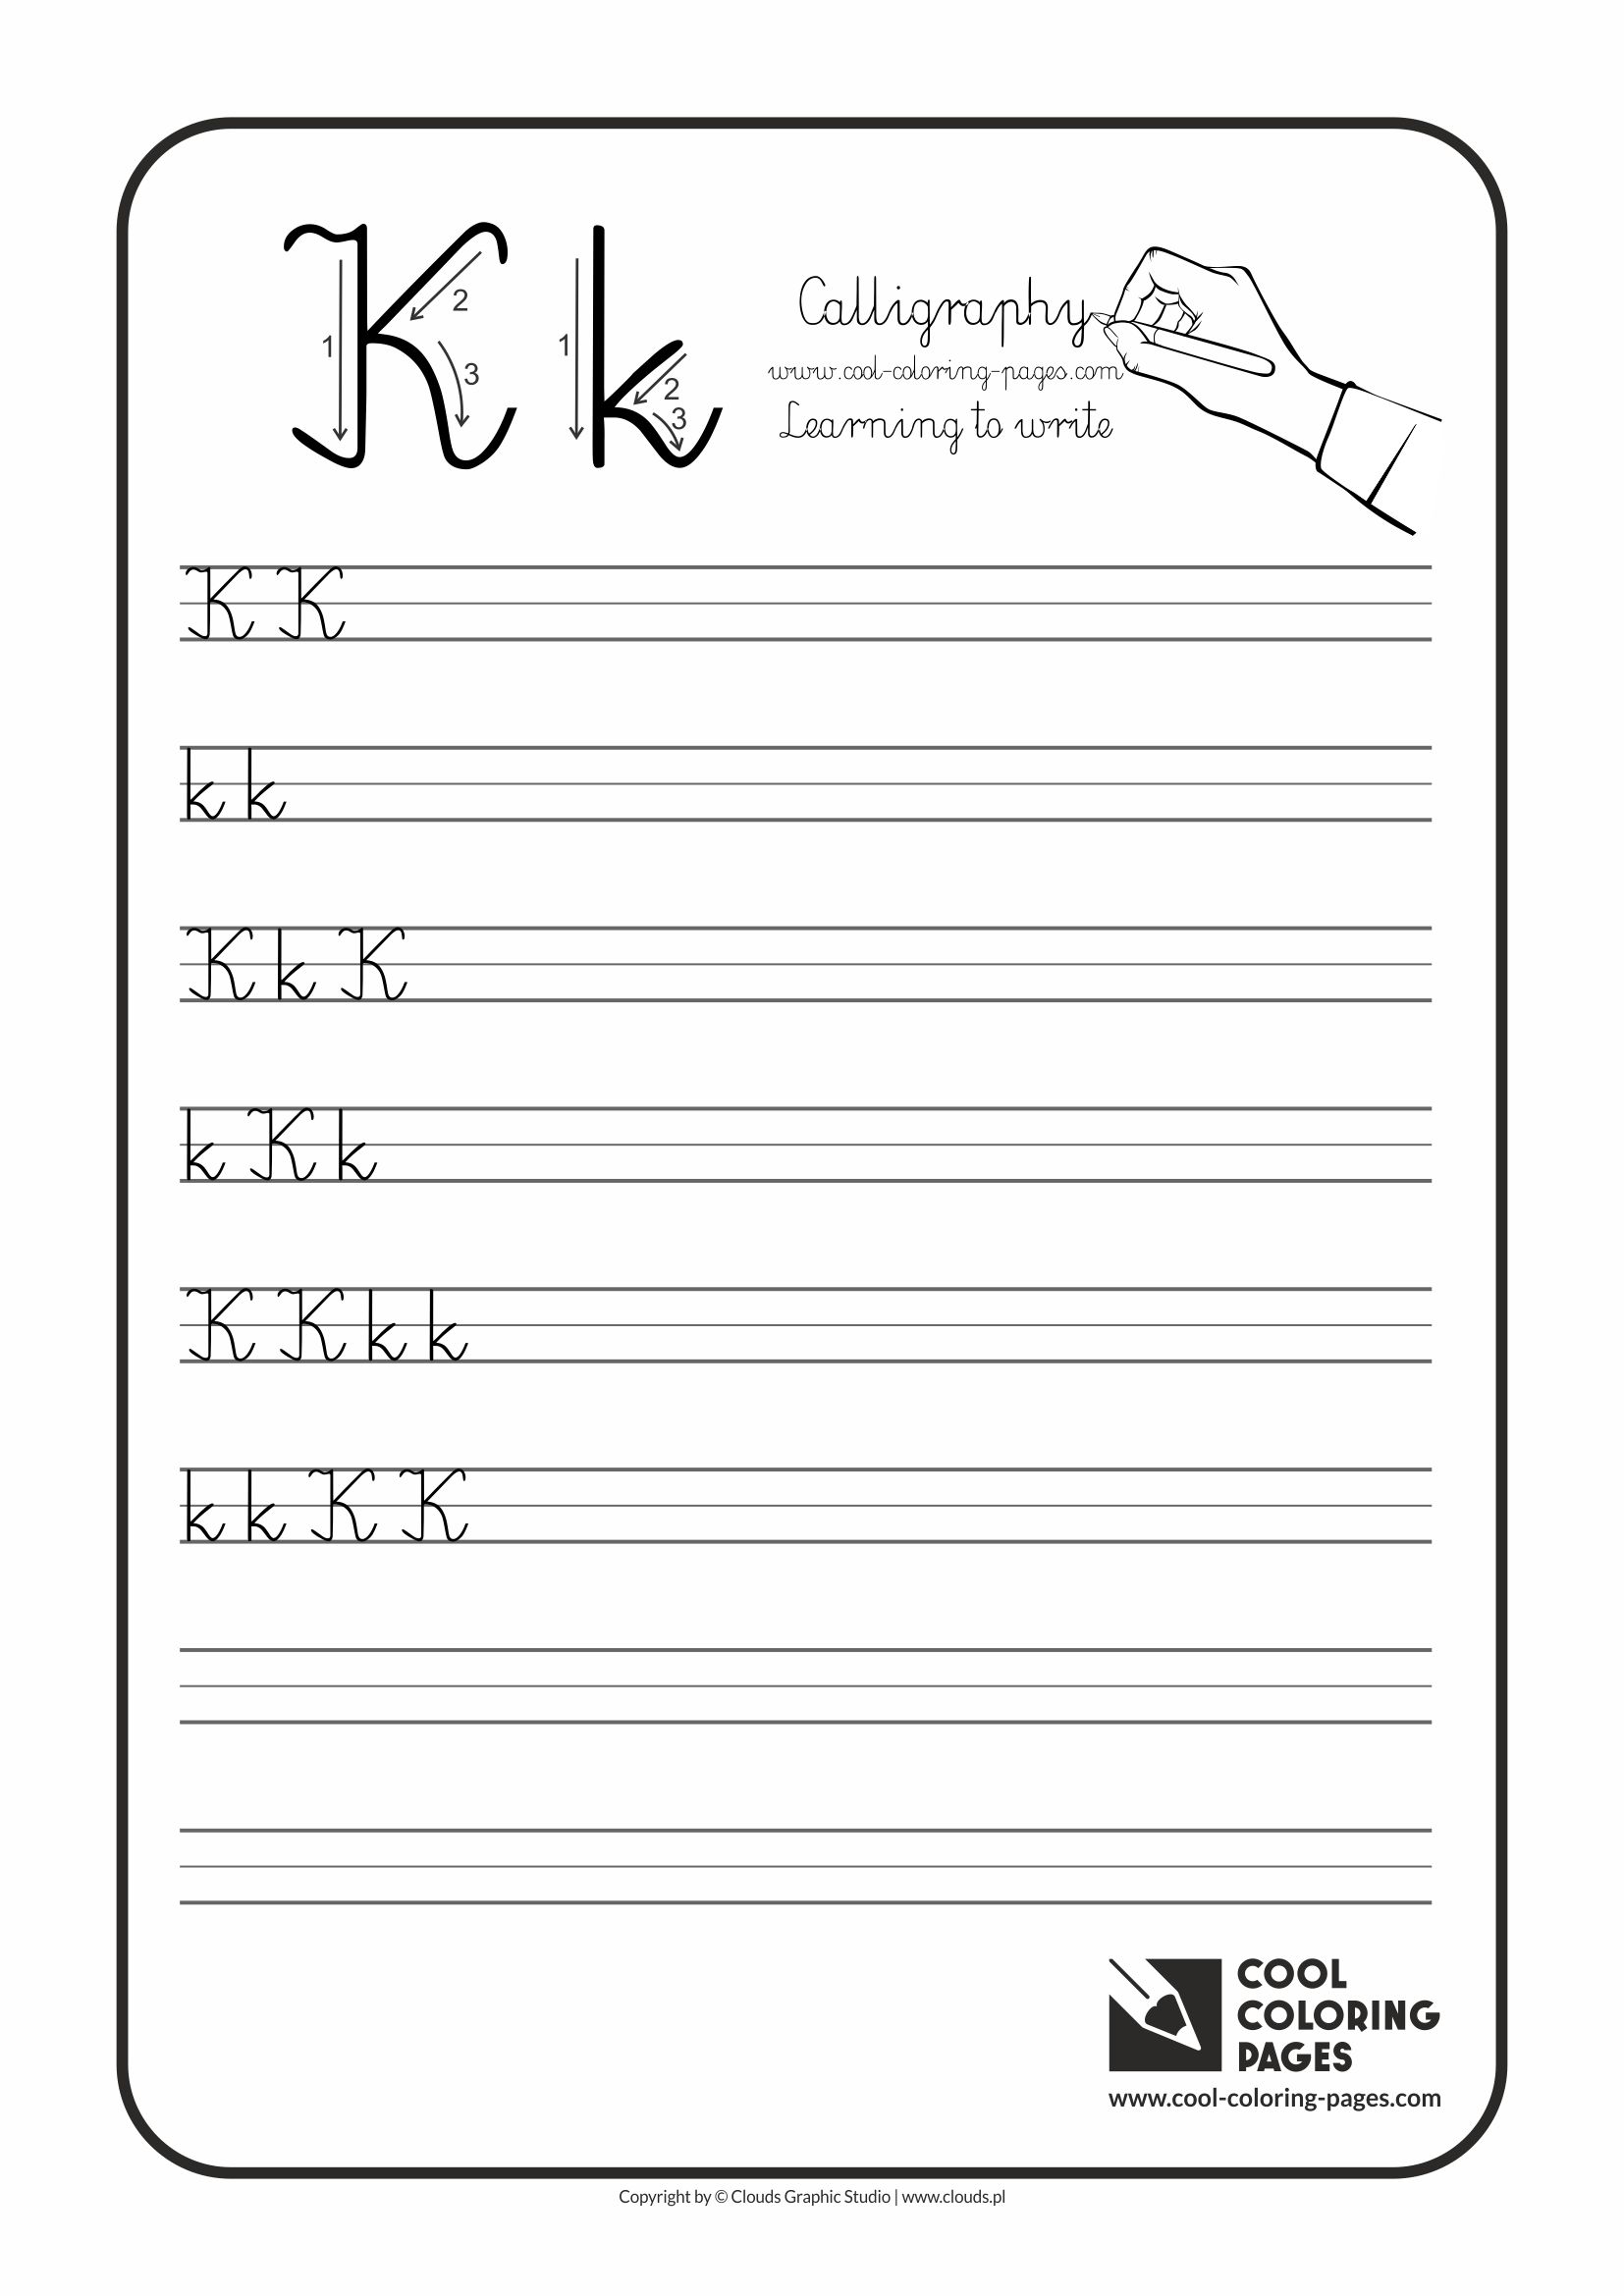 Cool Coloring Pages / Calligraphy / Letter K - Handwriting for kids / Worksheets